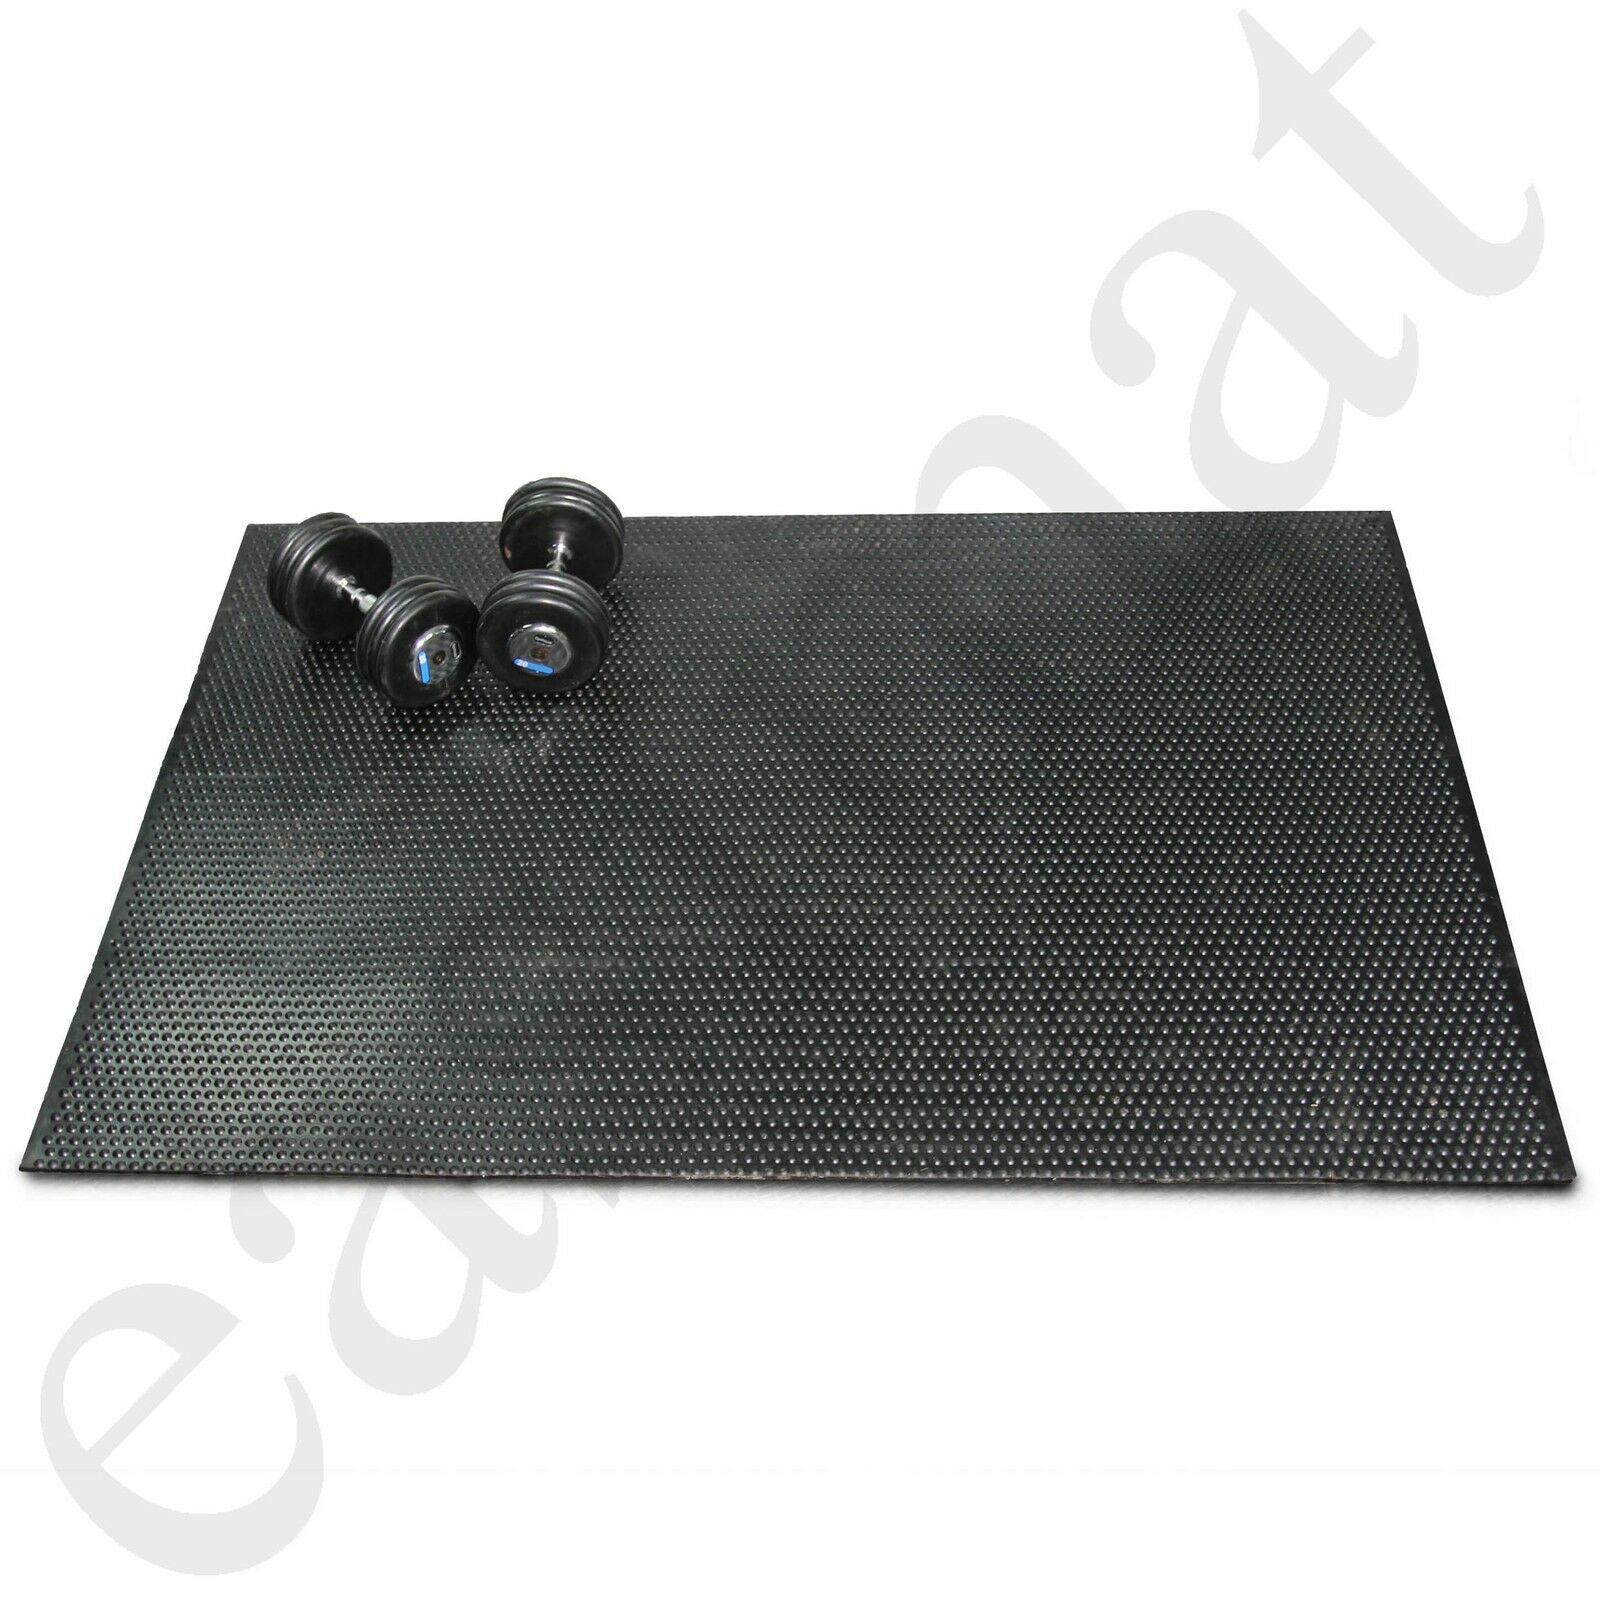 Rubber Gym Mats Heavy Duty Large Commercial Flooring 10mm Thick 6 X 4 Easimat Easimat